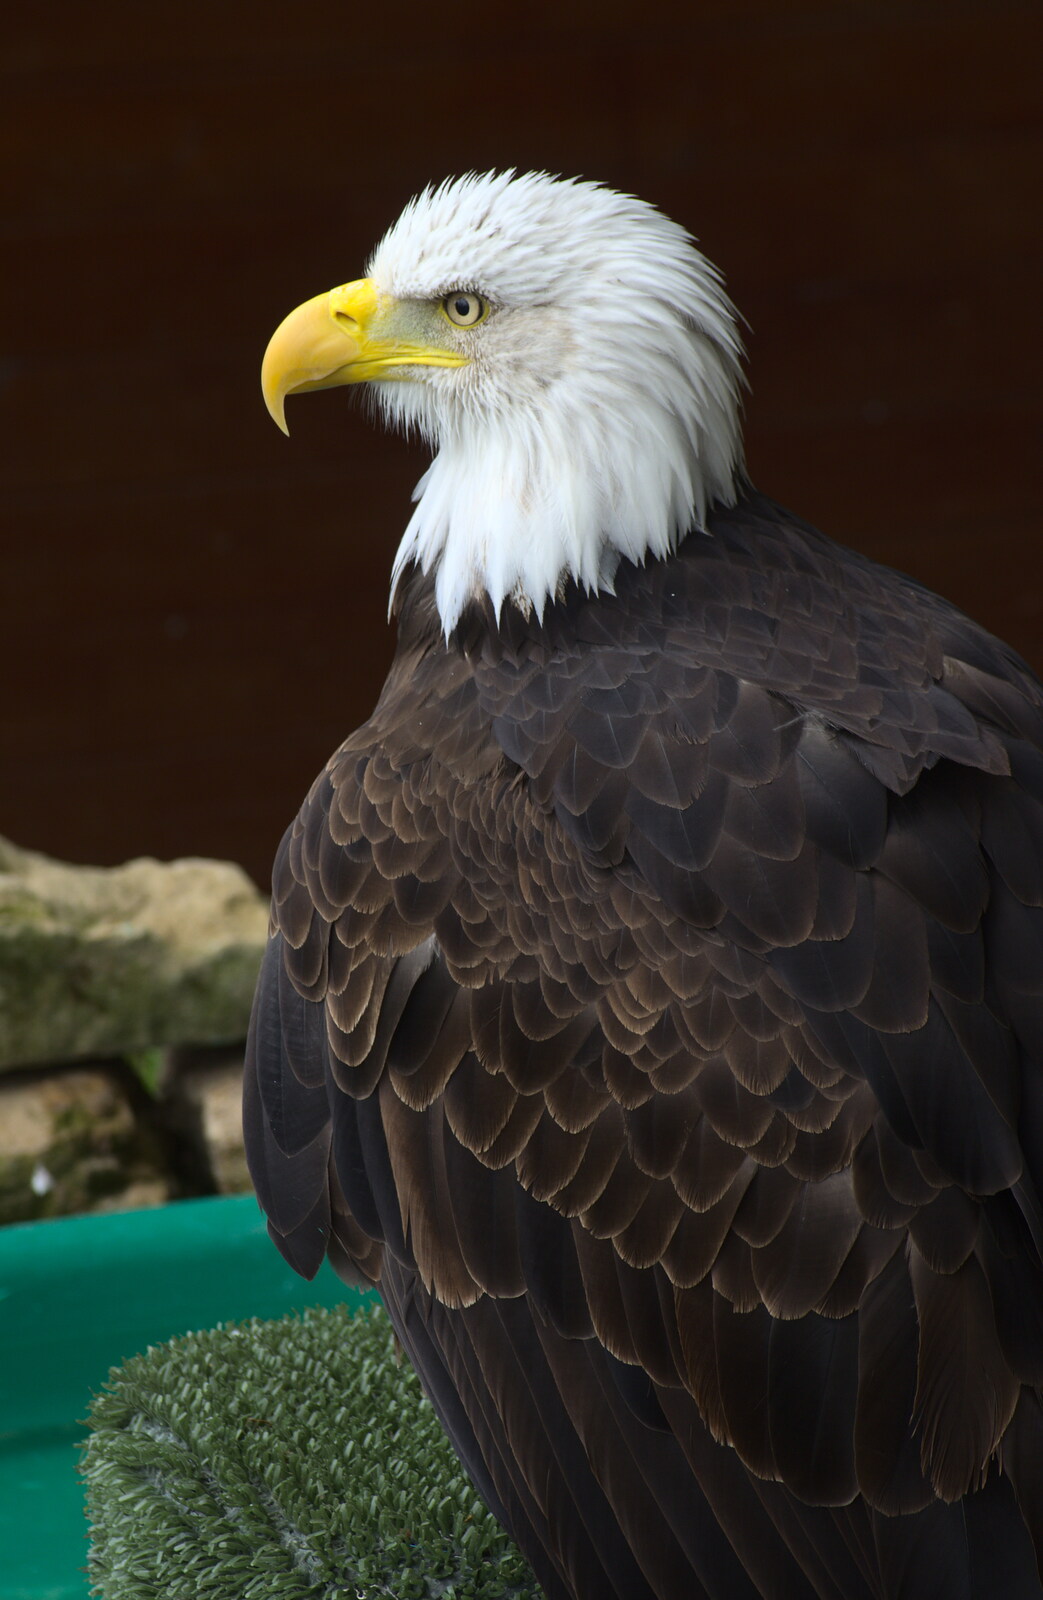 Sam the bald eagle poses for another photo from Tiger Cubs at Banham Zoo, Banham, Norfolk - 6th August 2013